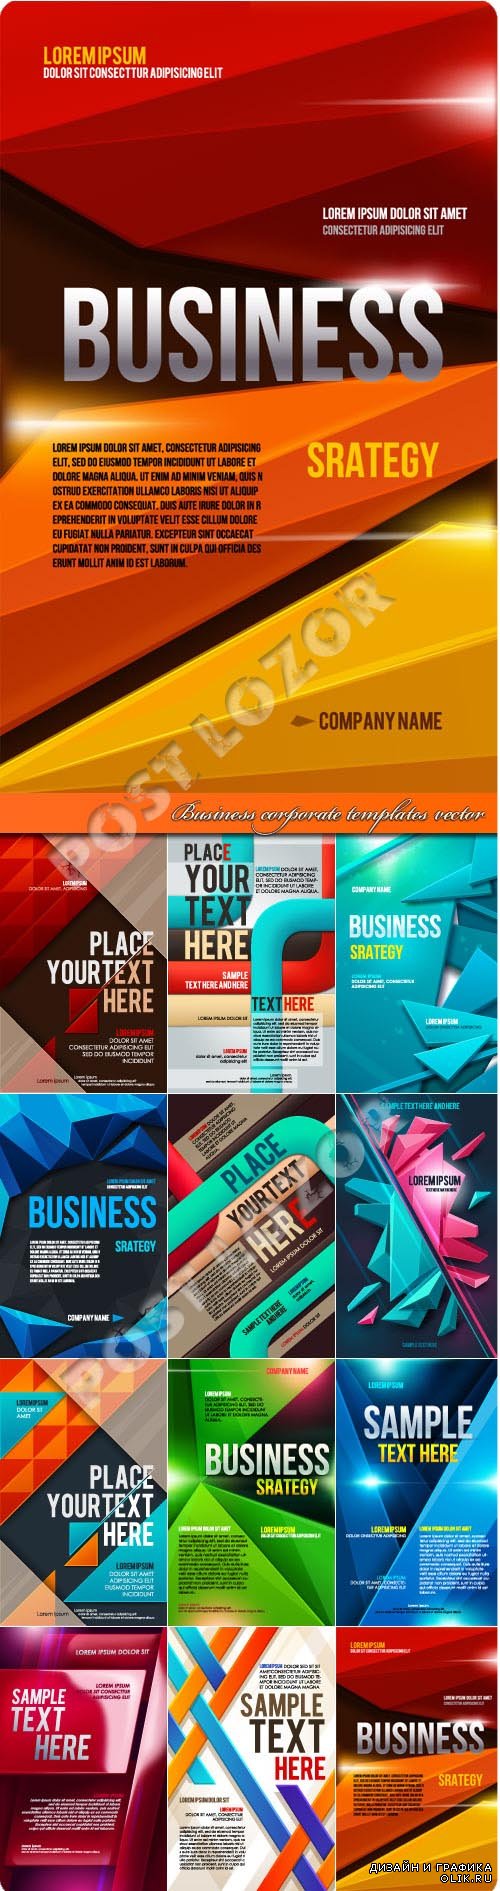 Business corporate templates vector